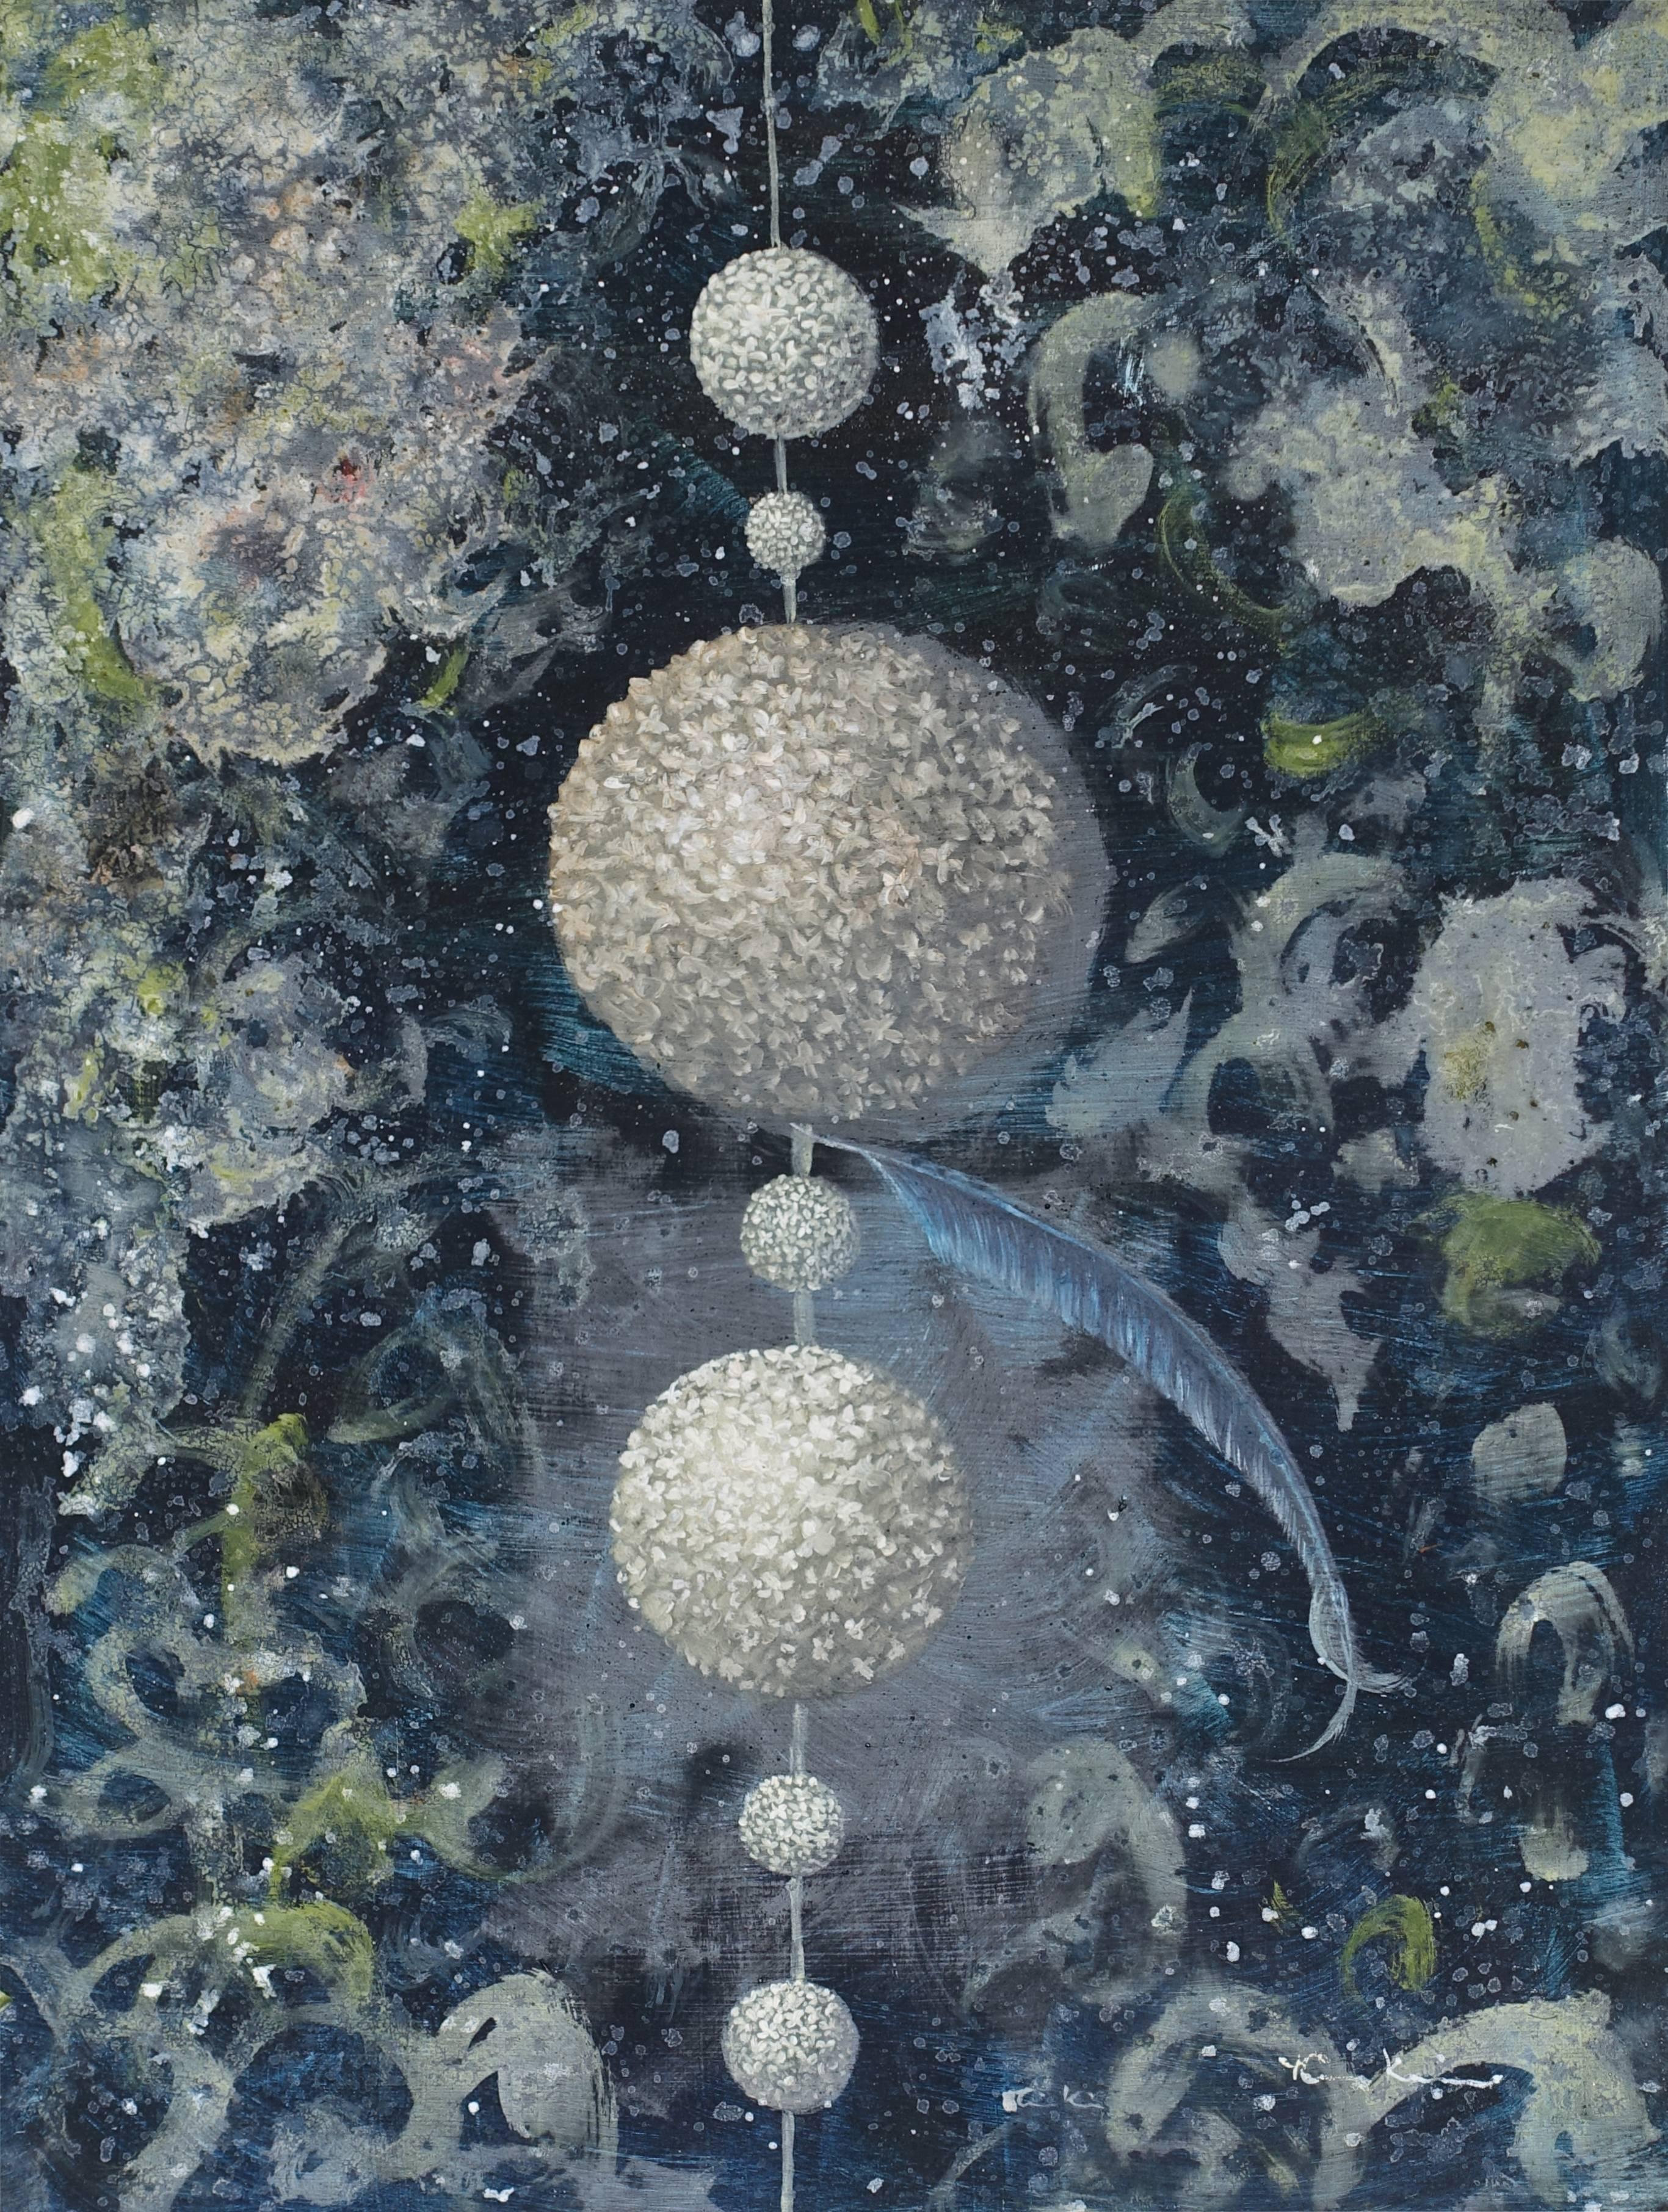 Maike Kreichgauer Figurative Painting - Spheres of Flowers with Feathers